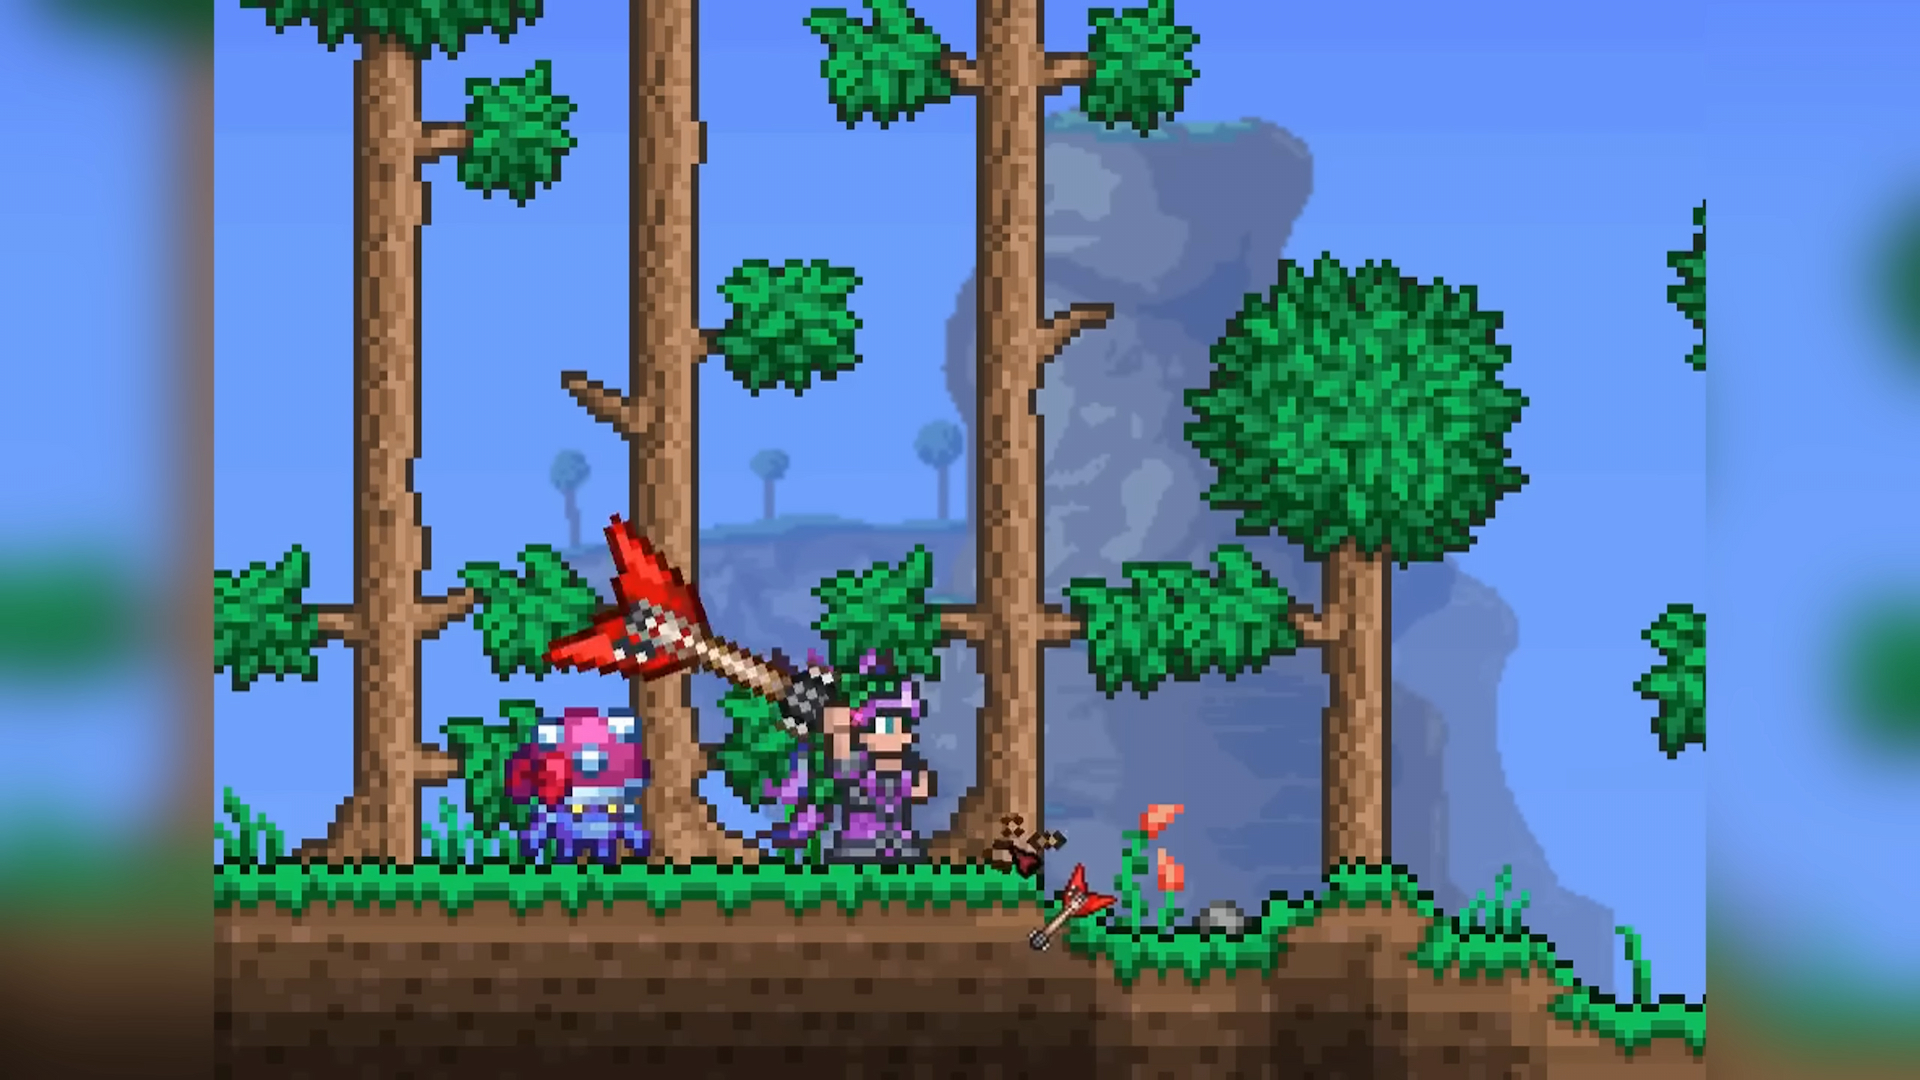 Cenx's green-haired Terraria character chopping a tree down with an axe while having a Mushroom Boi! pet from Dead Cells out